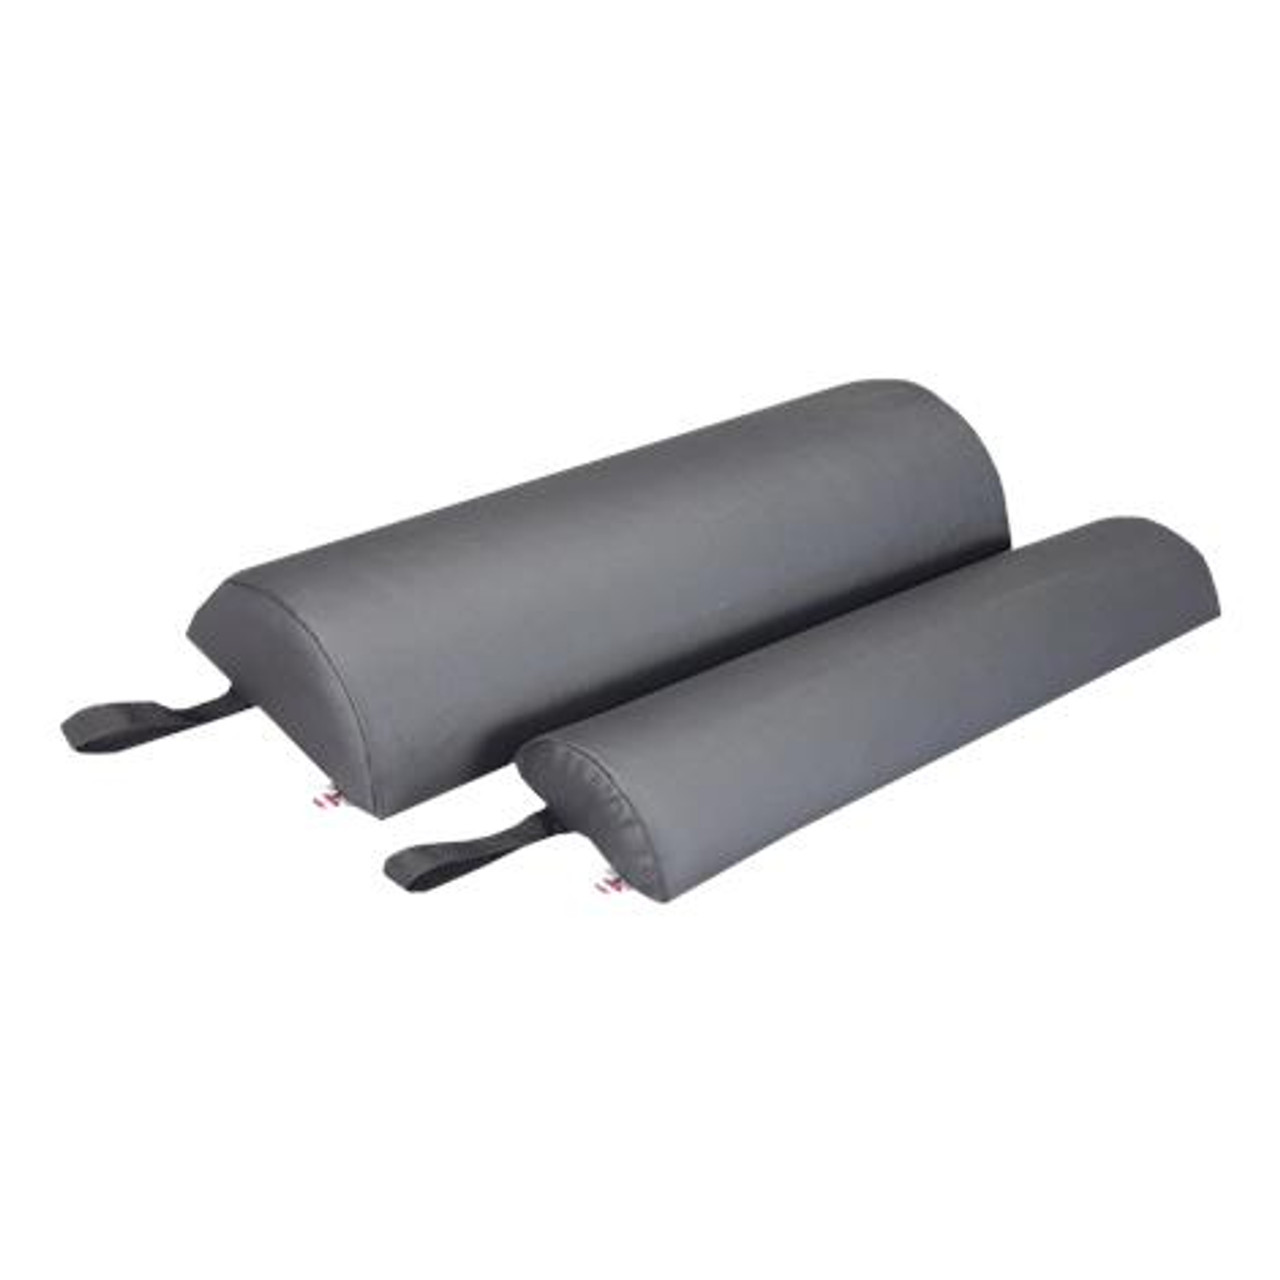 Core Products PRO-902 Half Round Support Bolster - 9" x 24"